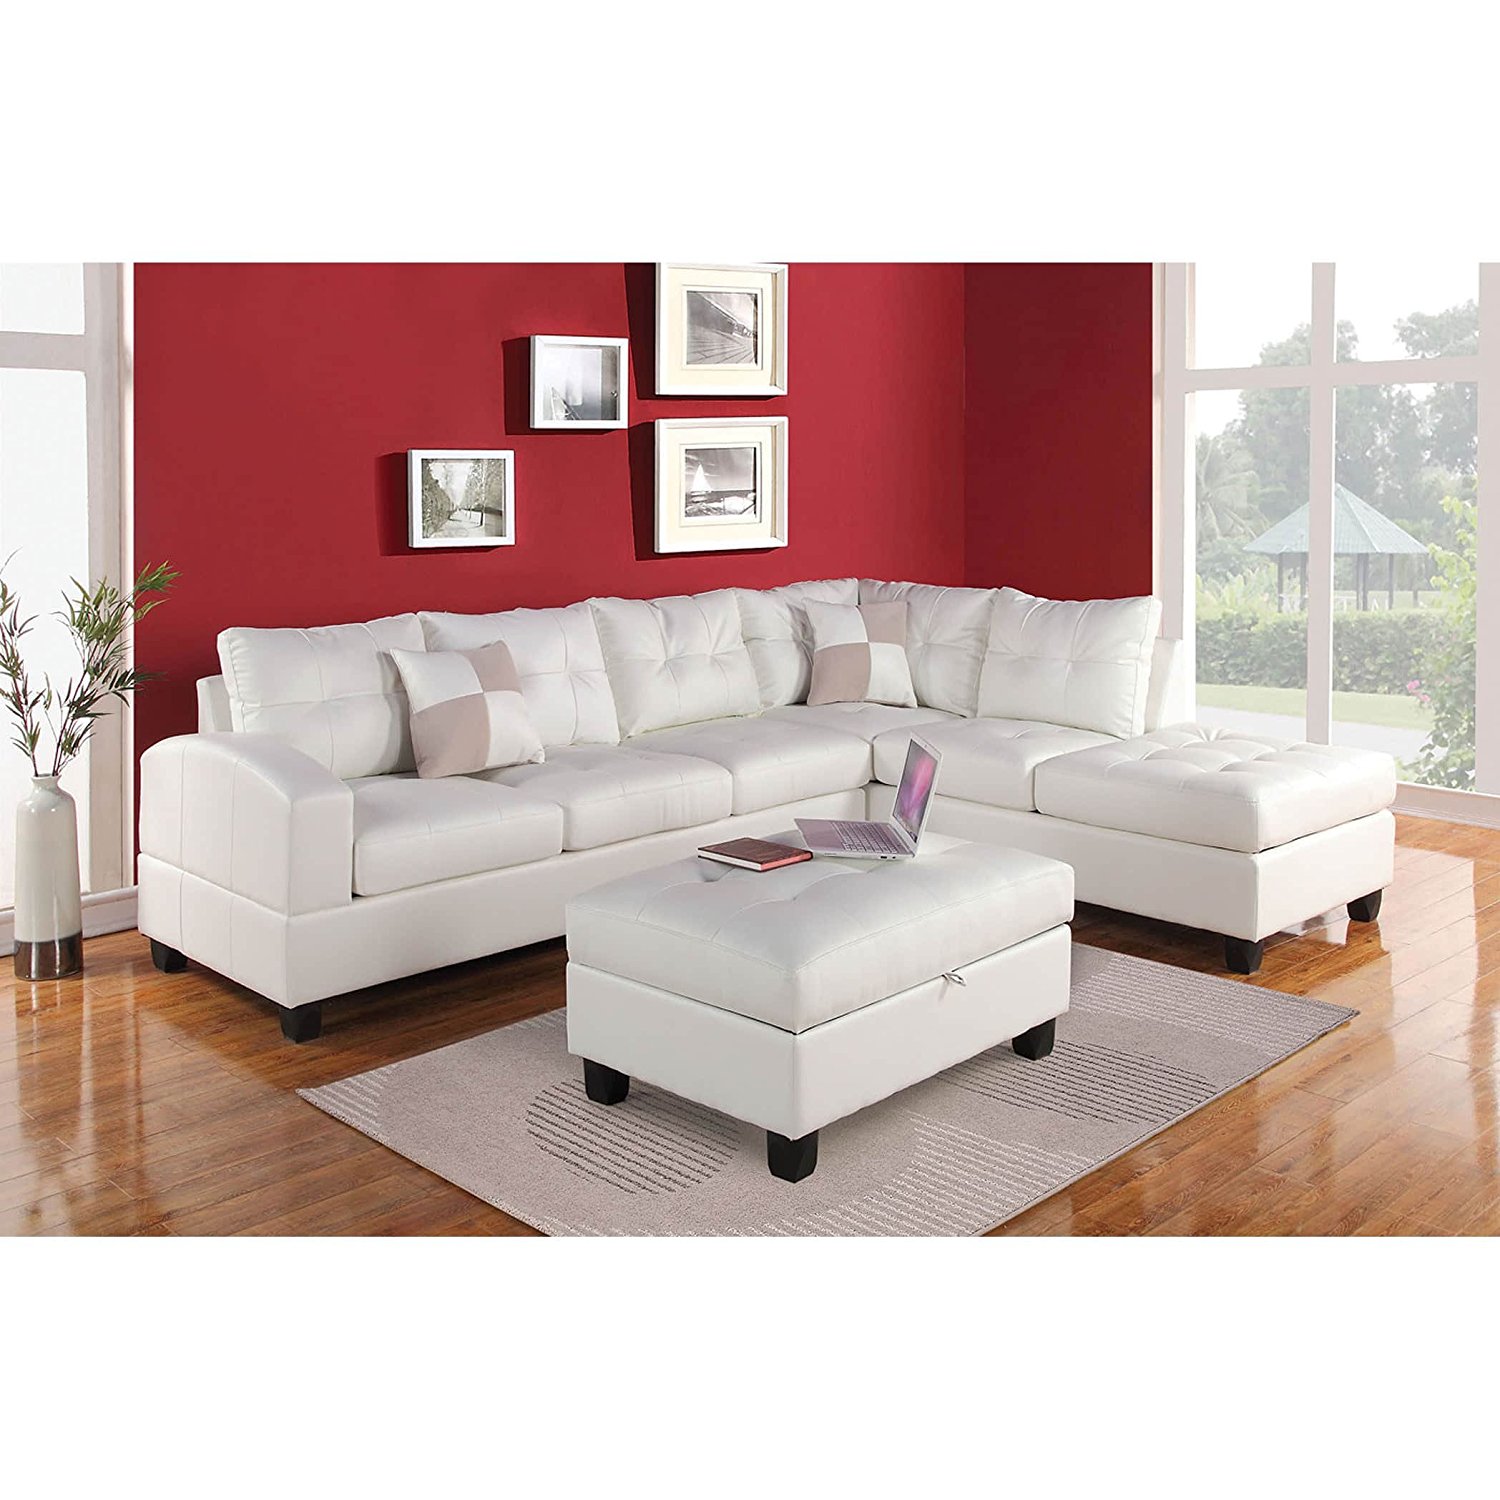 ACME Furniture Kiva 51175 Sectional Sofa with 2 Pillows, White Bonded Leather Match